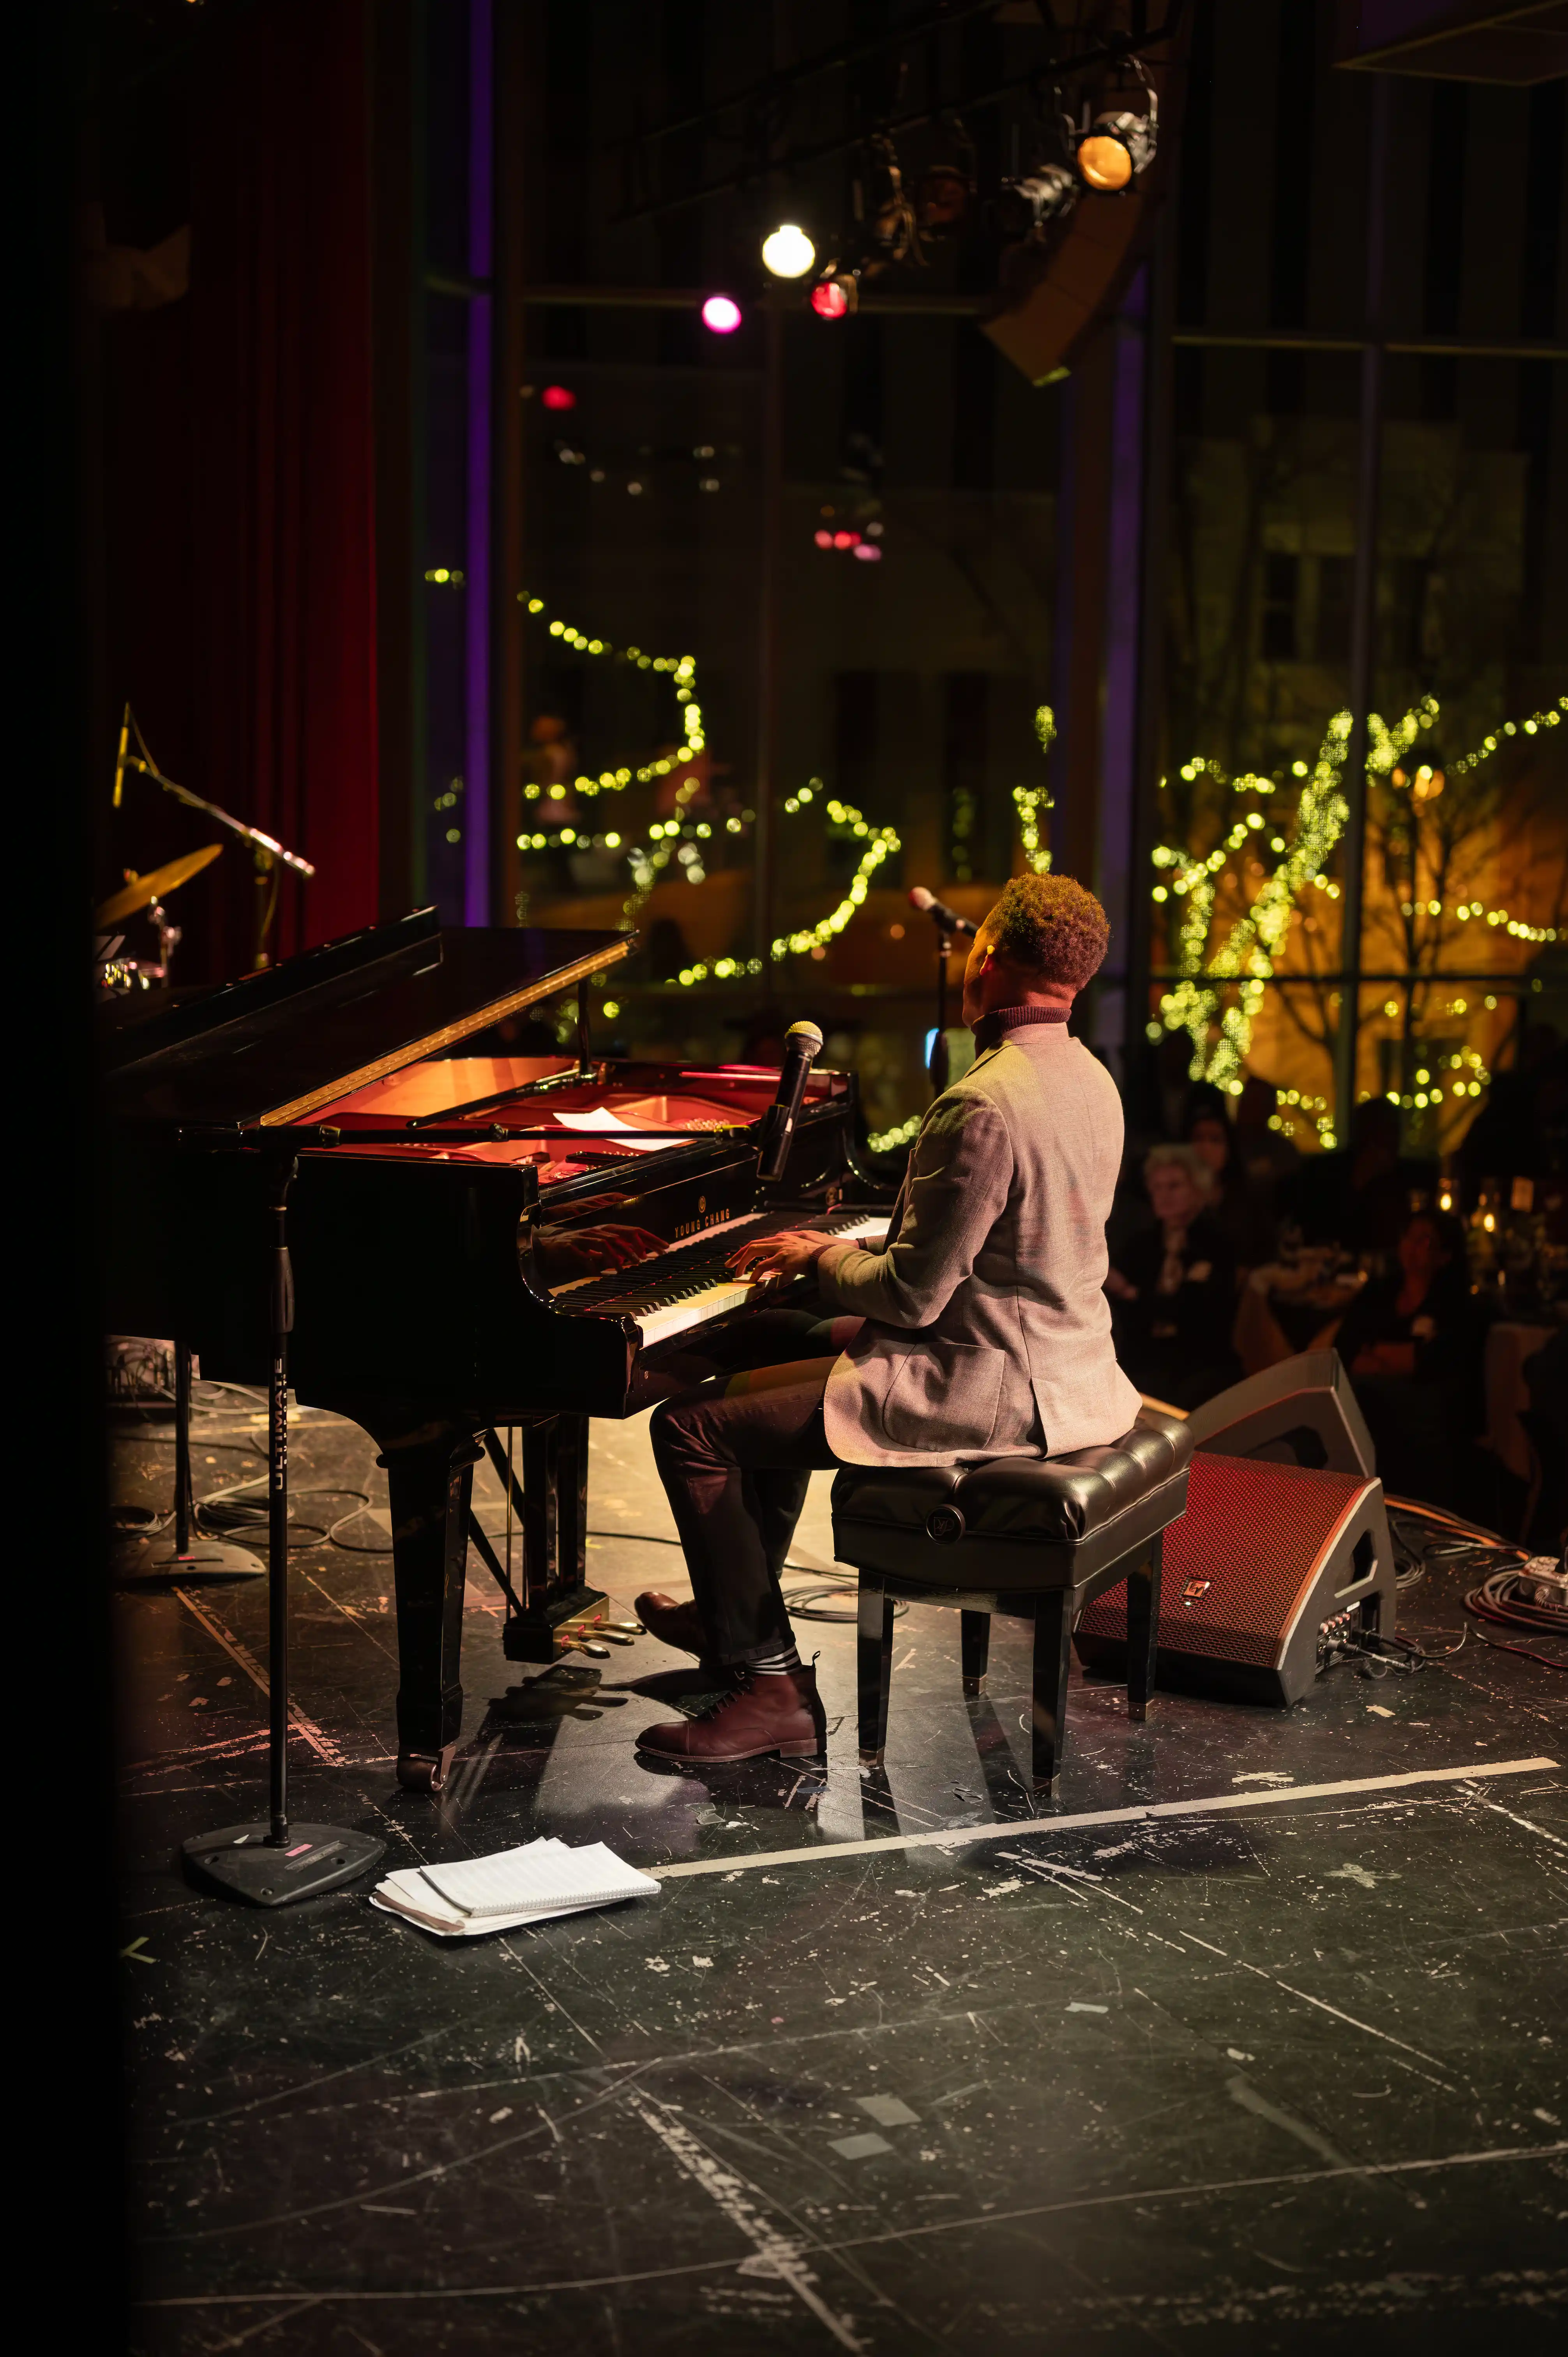 Pianist performing on stage with a grand piano in a dimly lit venue with soft lighting and reflections on the background windows.